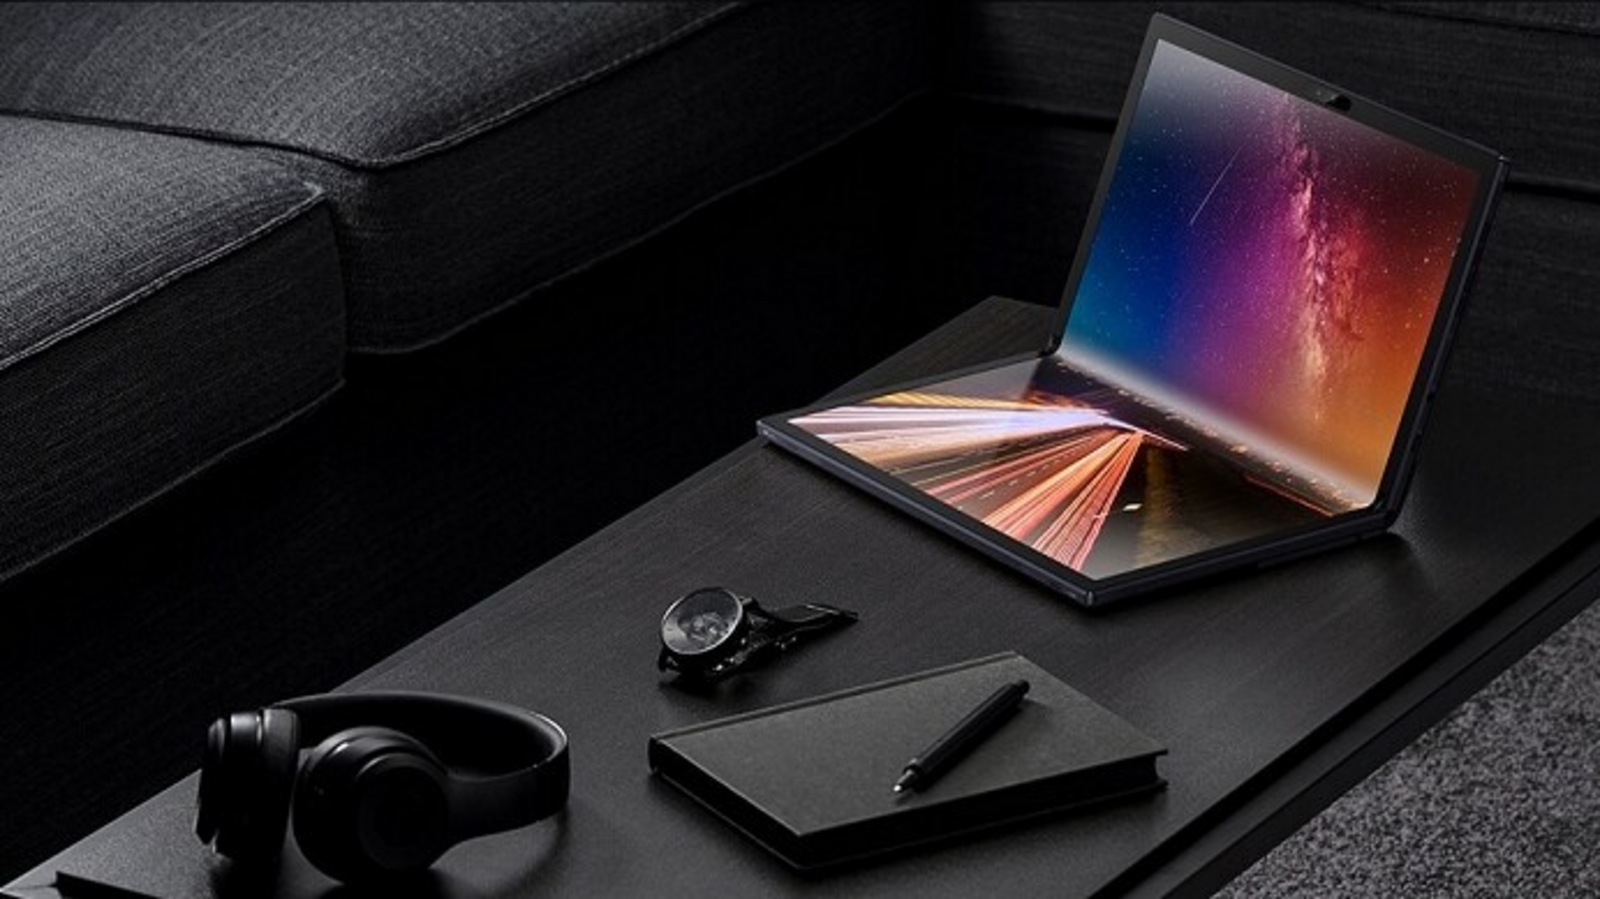 Wistron Foldbook concept: A 17 inch tablet or desktop that becomes a 10  inch laptop (foldable displays) - Liliputing